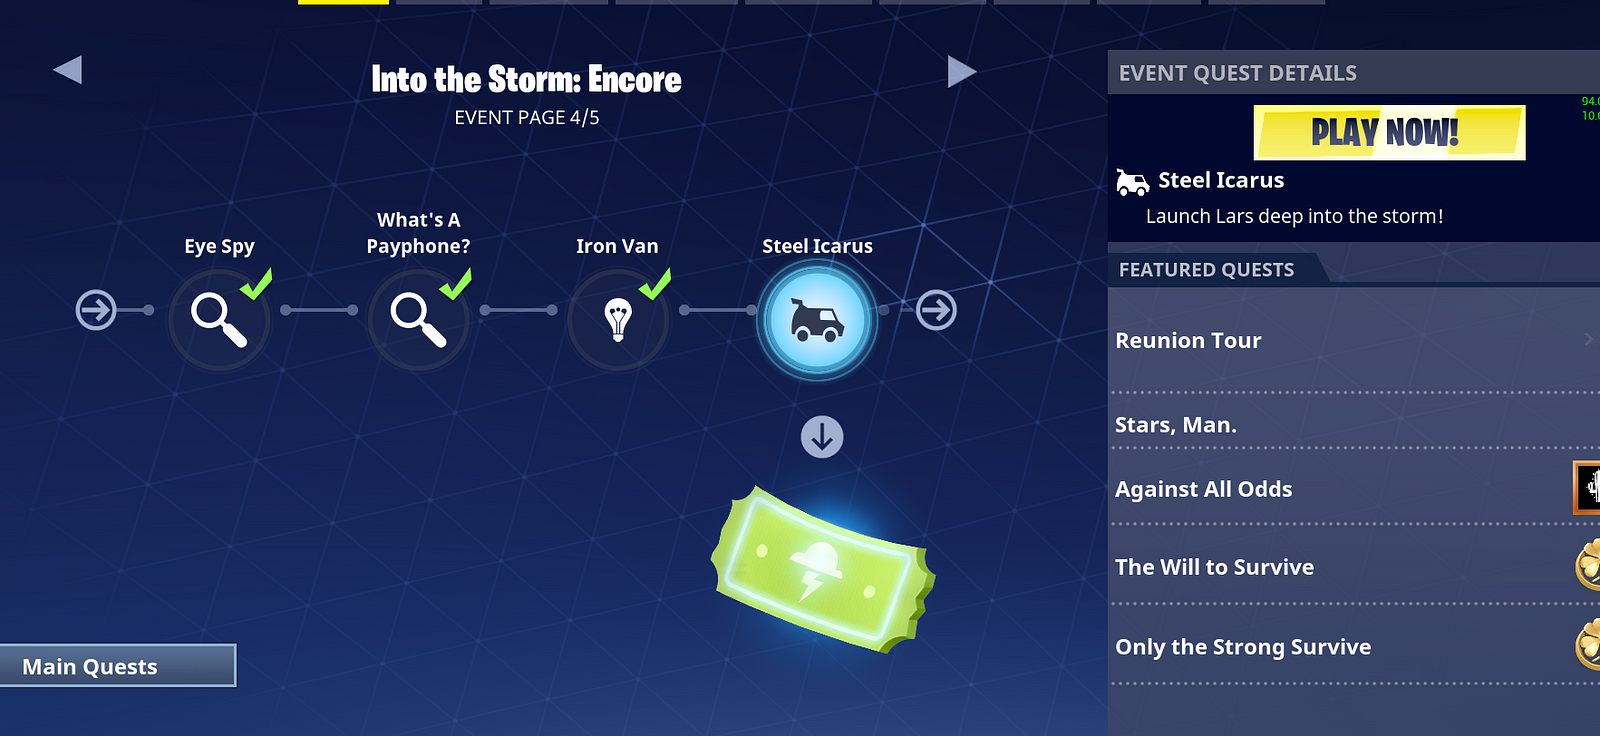 progressing the questline give event tickets primarily but can sometimes offer vbucks it can be accesed via play view event as seen below - v bucks quests